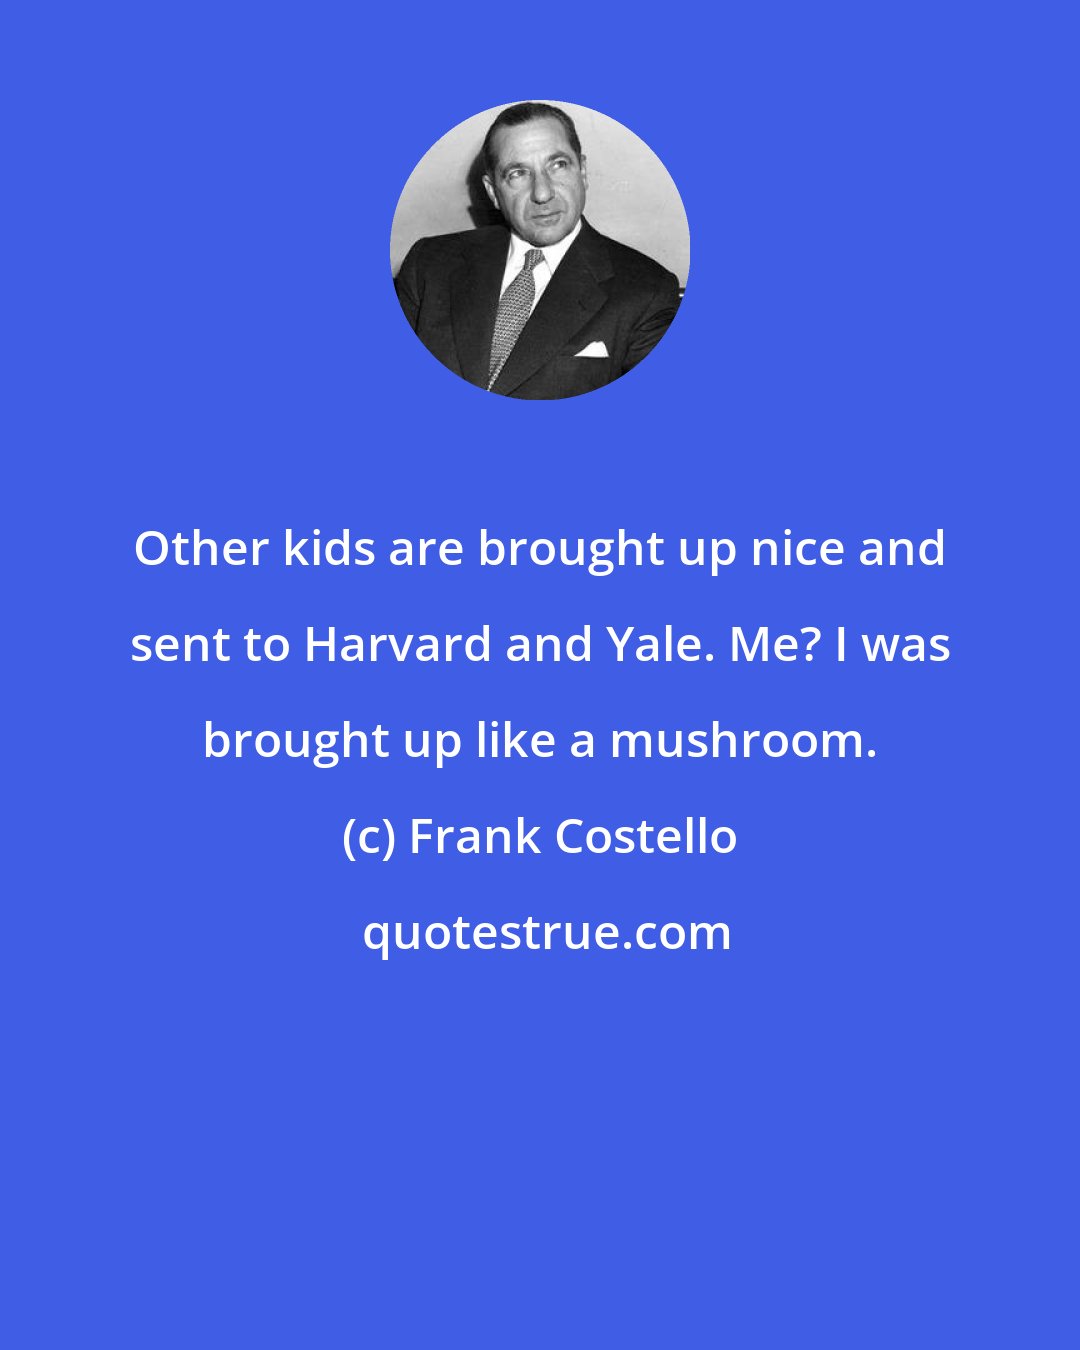 Frank Costello: Other kids are brought up nice and sent to Harvard and Yale. Me? I was brought up like a mushroom.